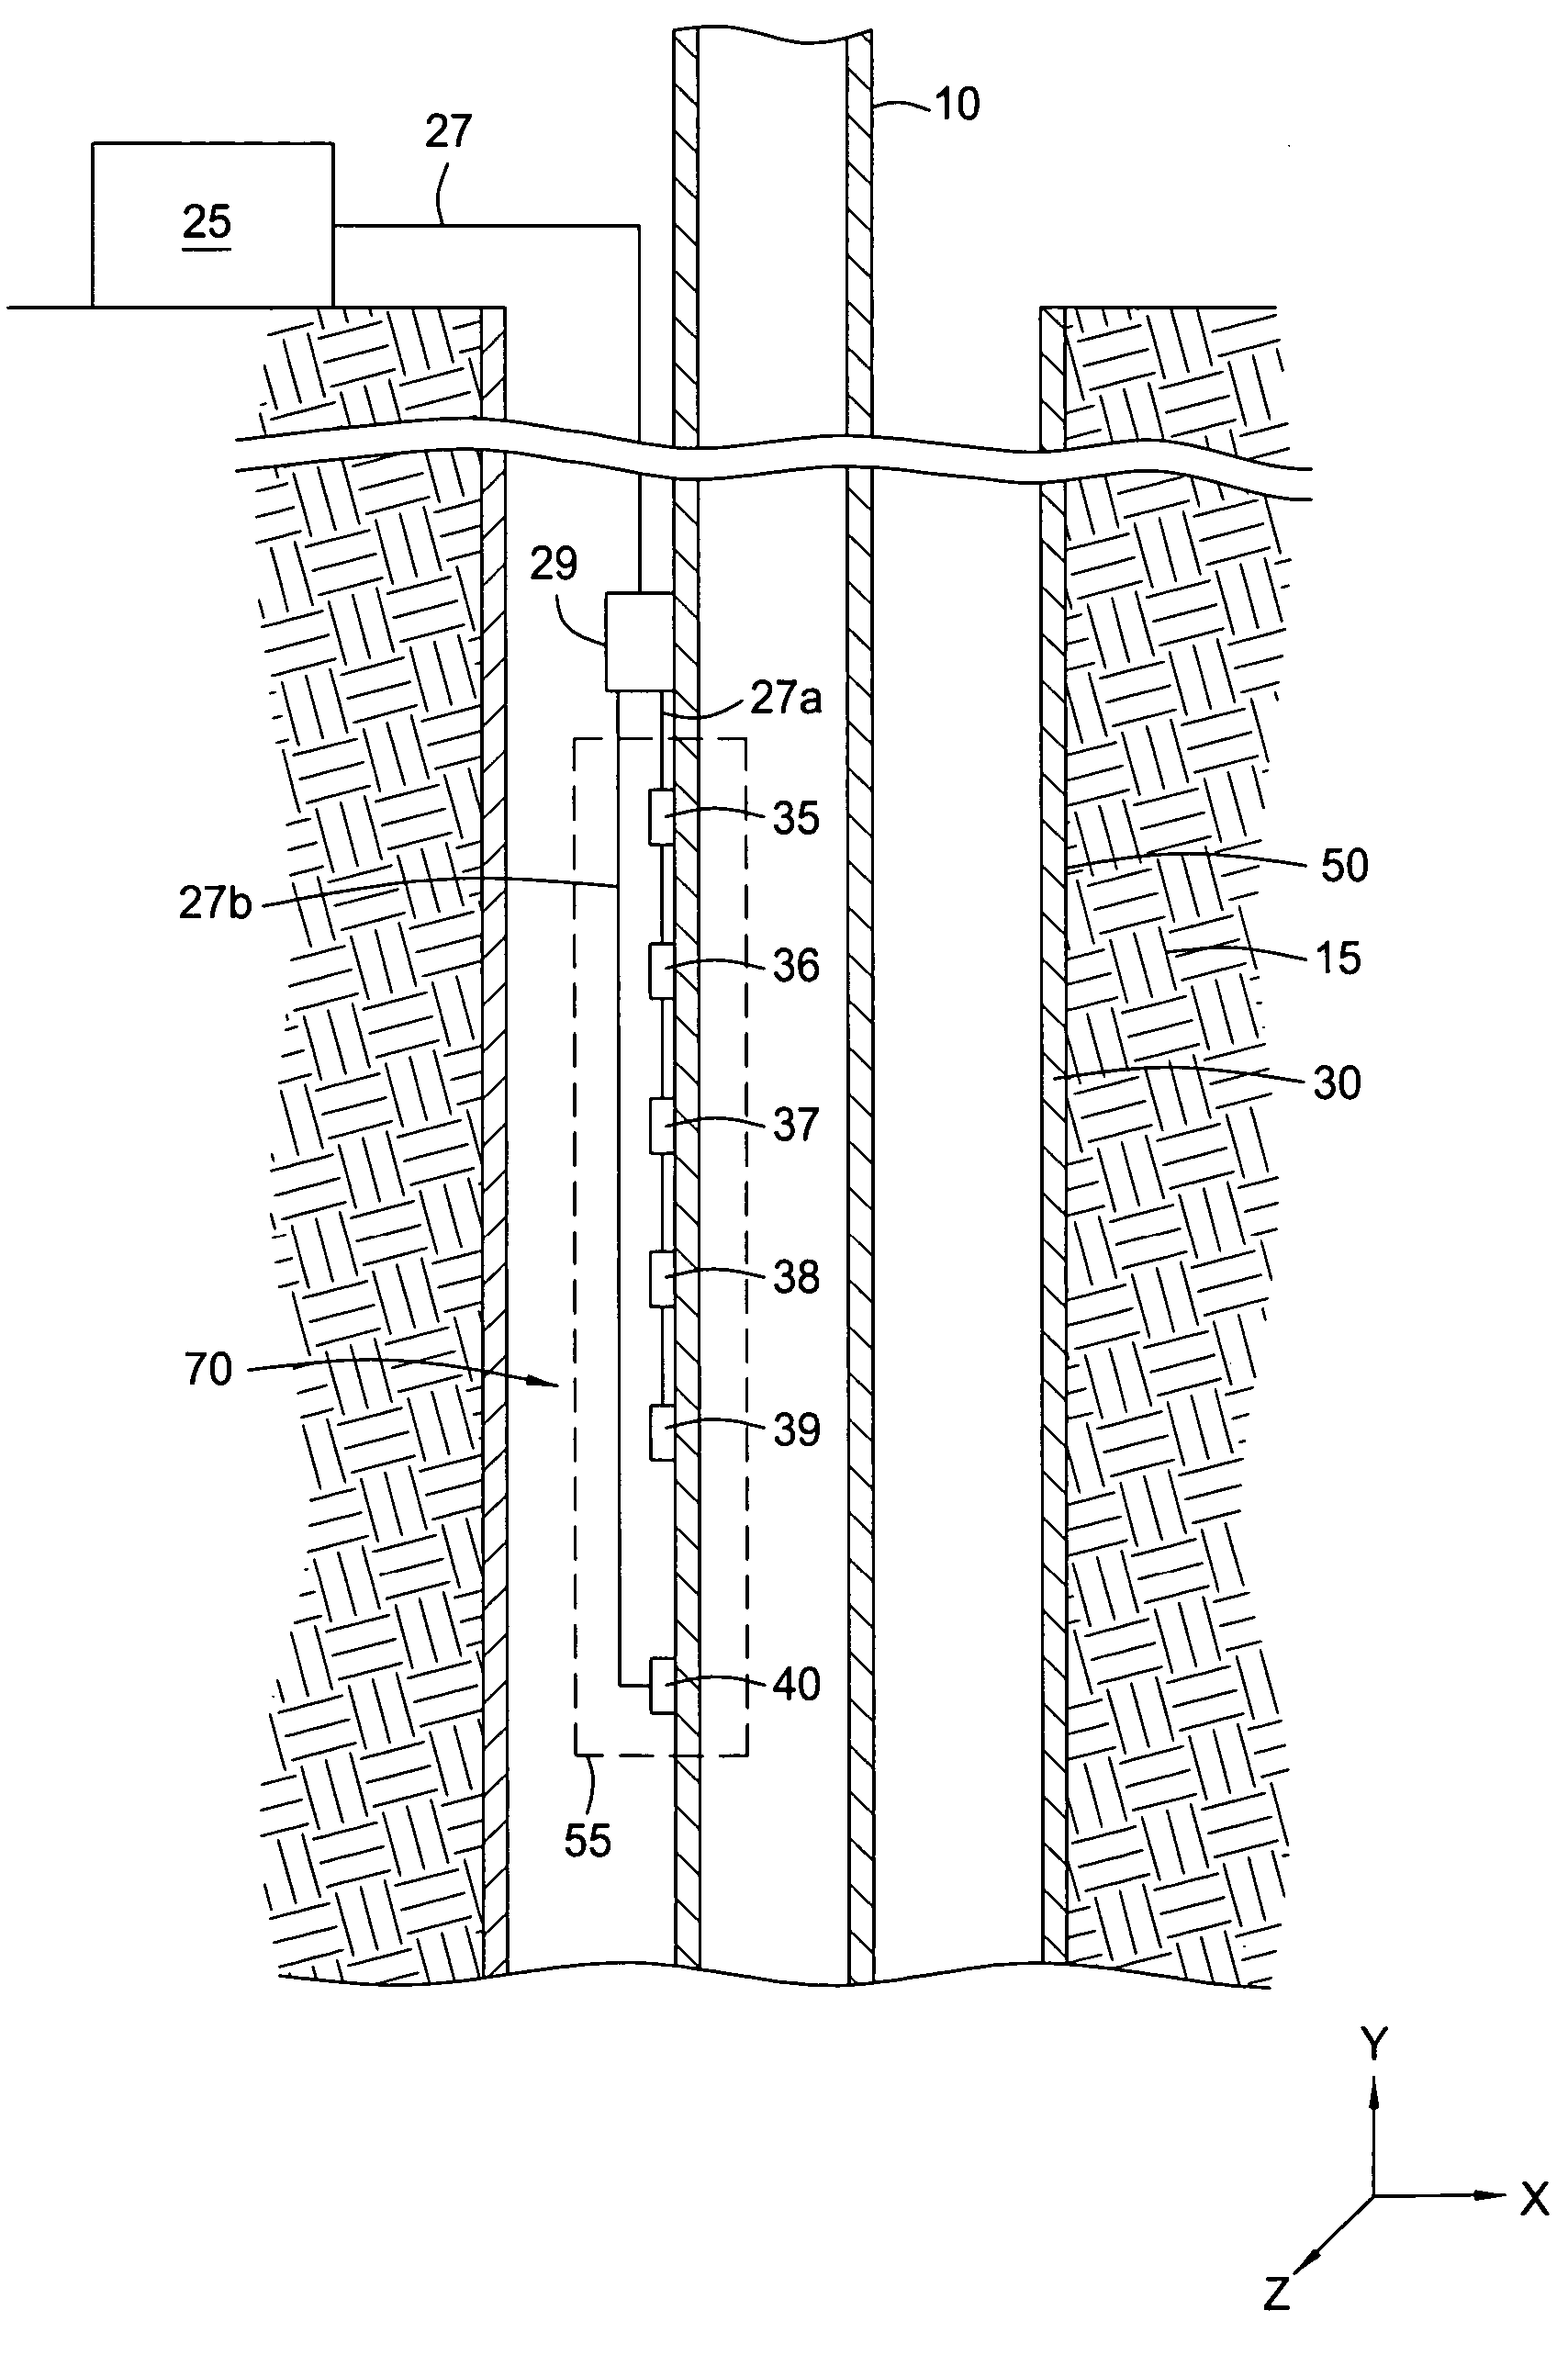 Permanently installed in-well fiber optic accelerometer-based seismic sensing apparatus and associated method